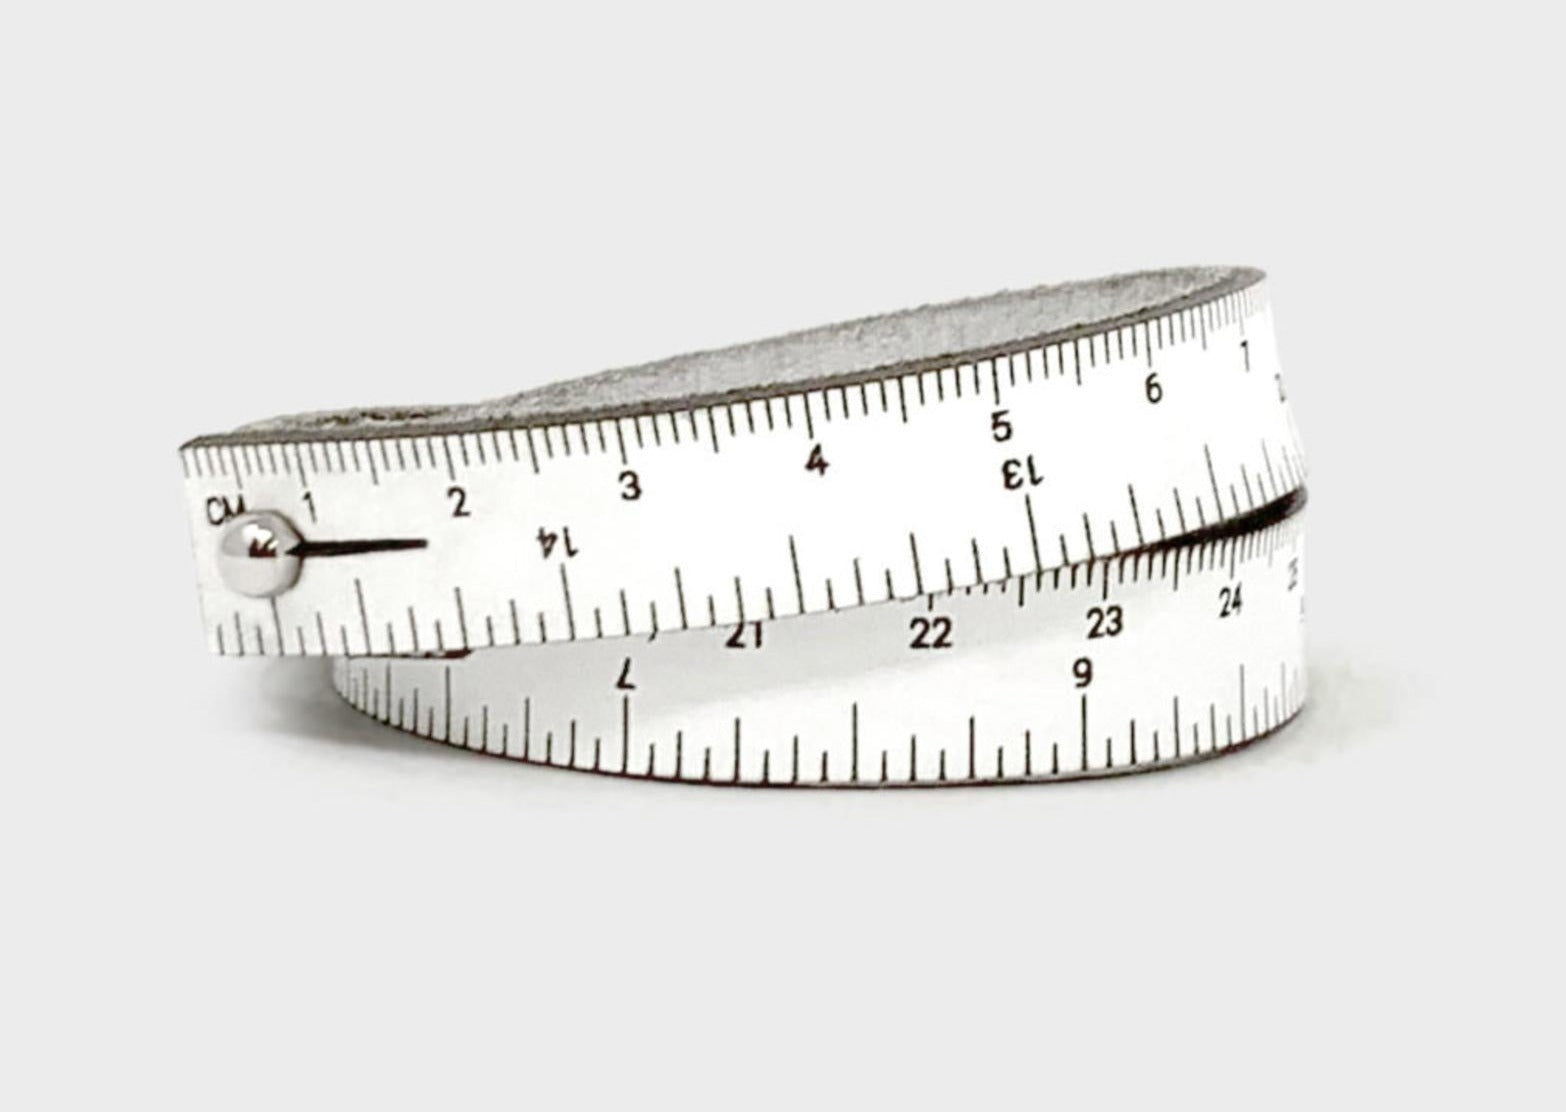 A photo of a white wrist ruler with engraved measurements